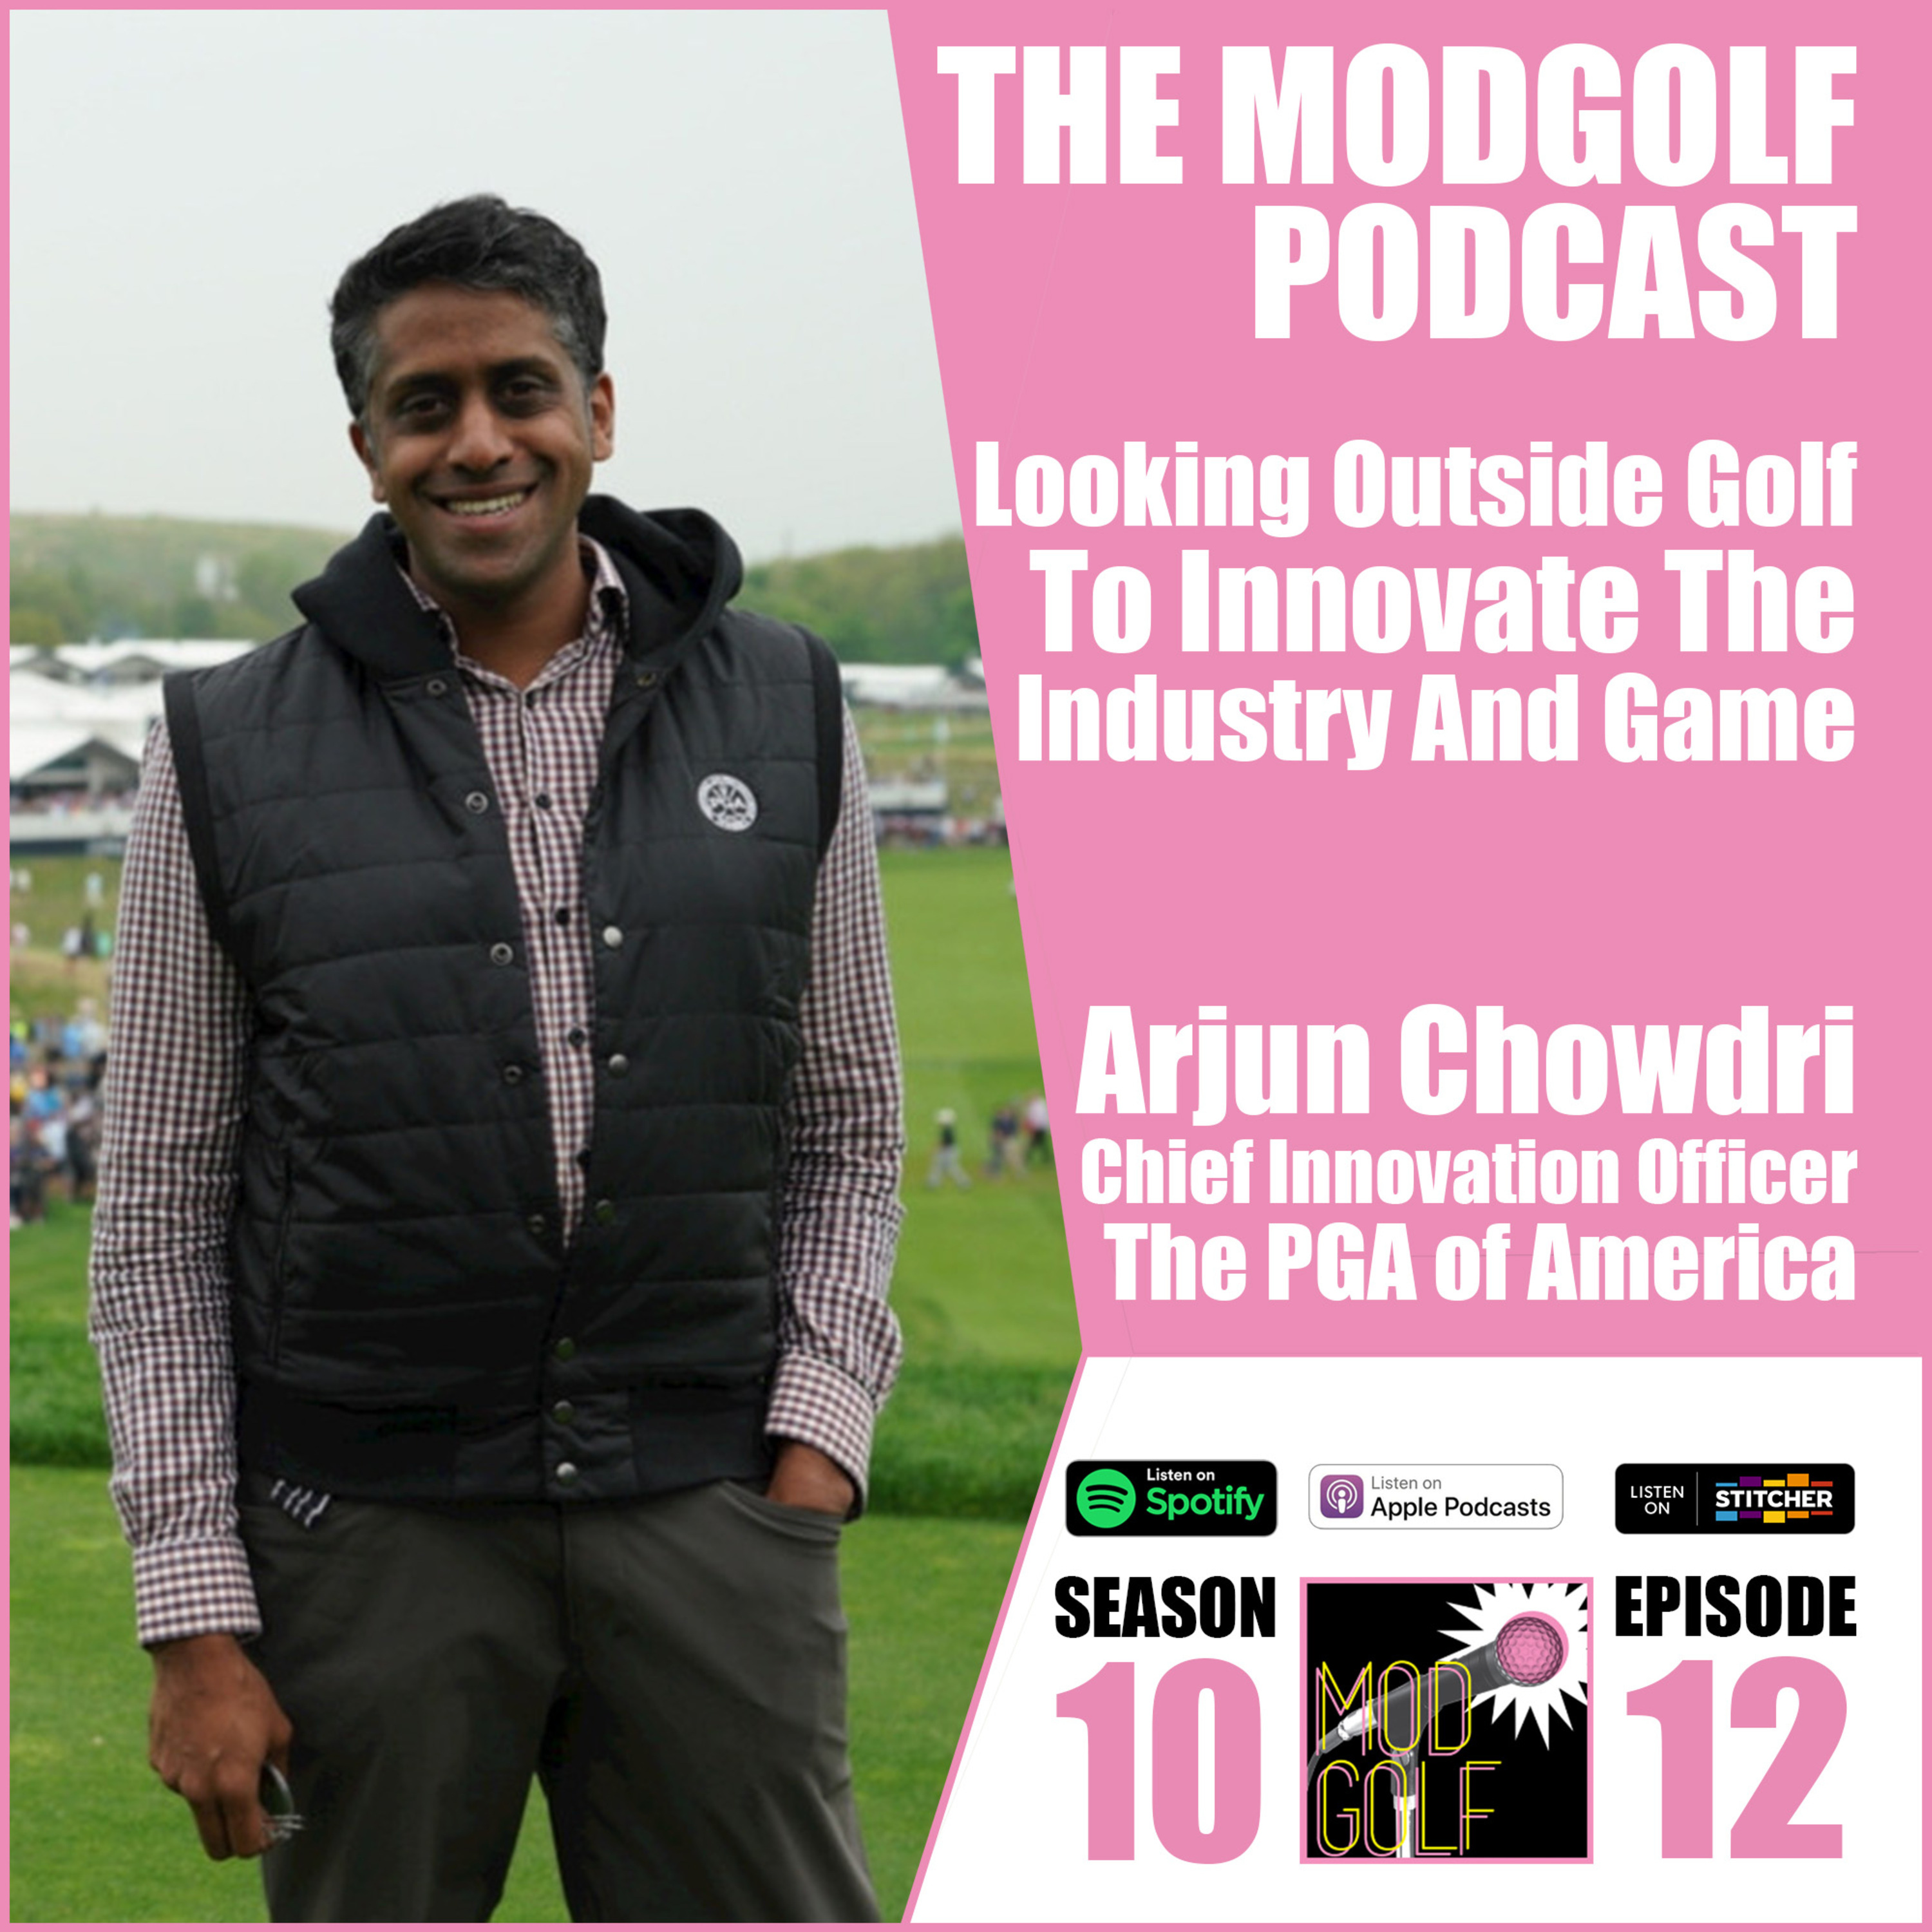 The ModGolf Podcast: Looking Outside Golf To Innovate The Industry And Game  - Arjun Chowdri, Chief Innovation Officer with The PGA of America